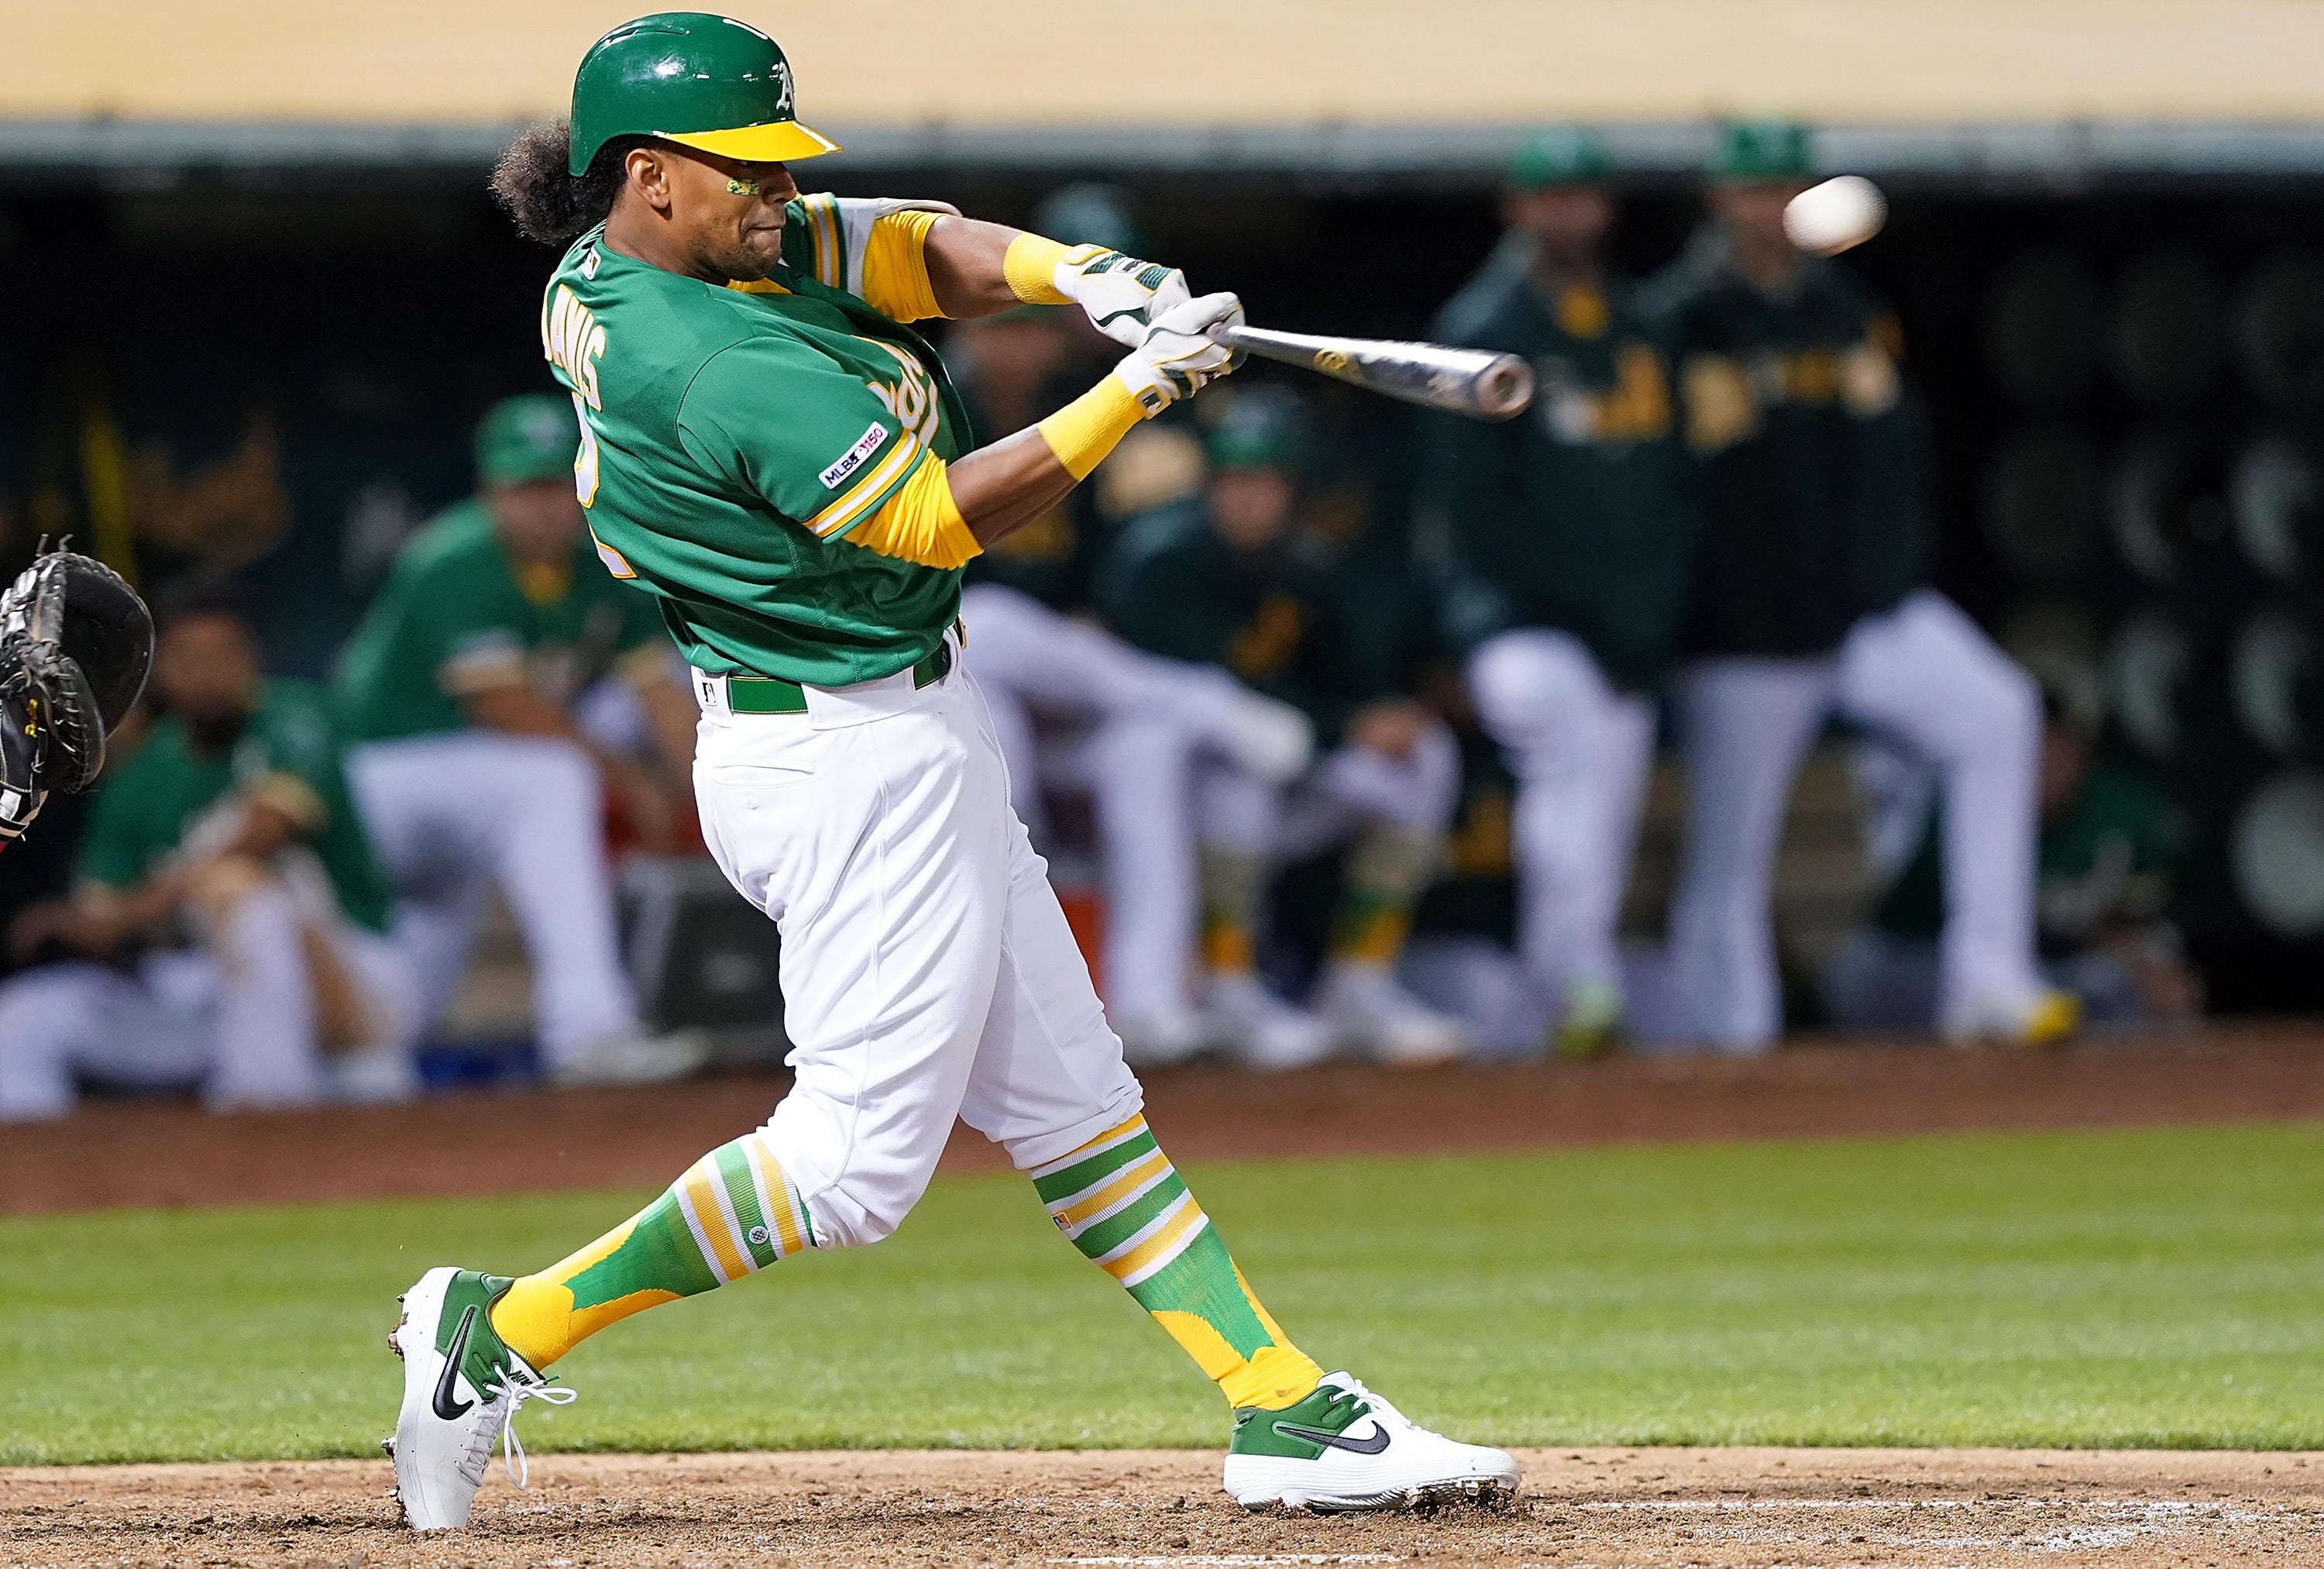 How to watch A’s baseball in 2019 without cable